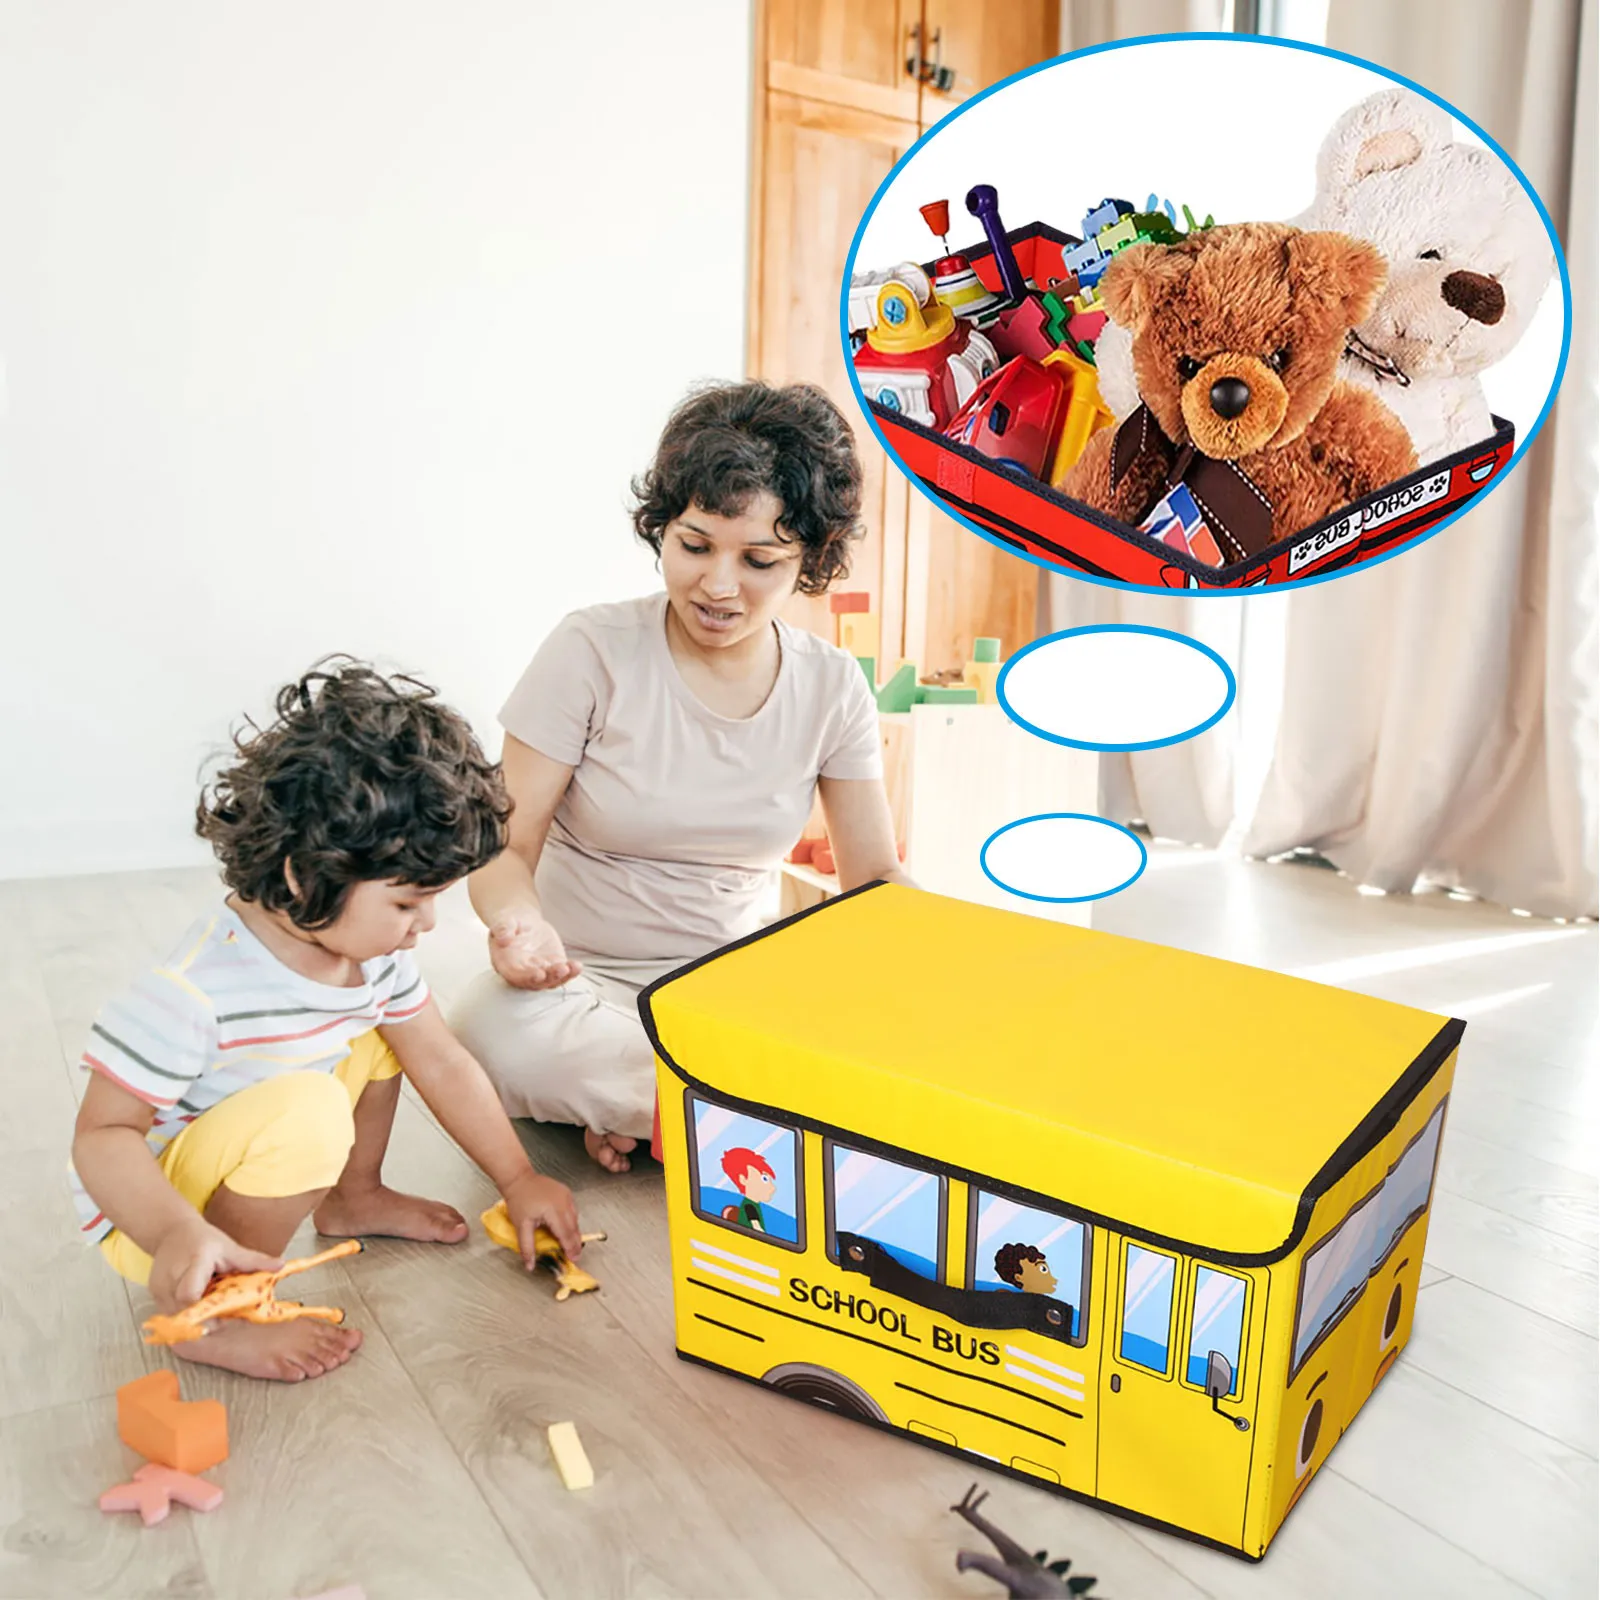 https://ae01.alicdn.com/kf/H889376c81b35403fa45d5aa50f6f84645/Toy-Chest-With-Flip-top-Lid-Kids-Collapsible-Storage-For-Playroom-Closet-Home-Sundries-Organizer-Set.jpg